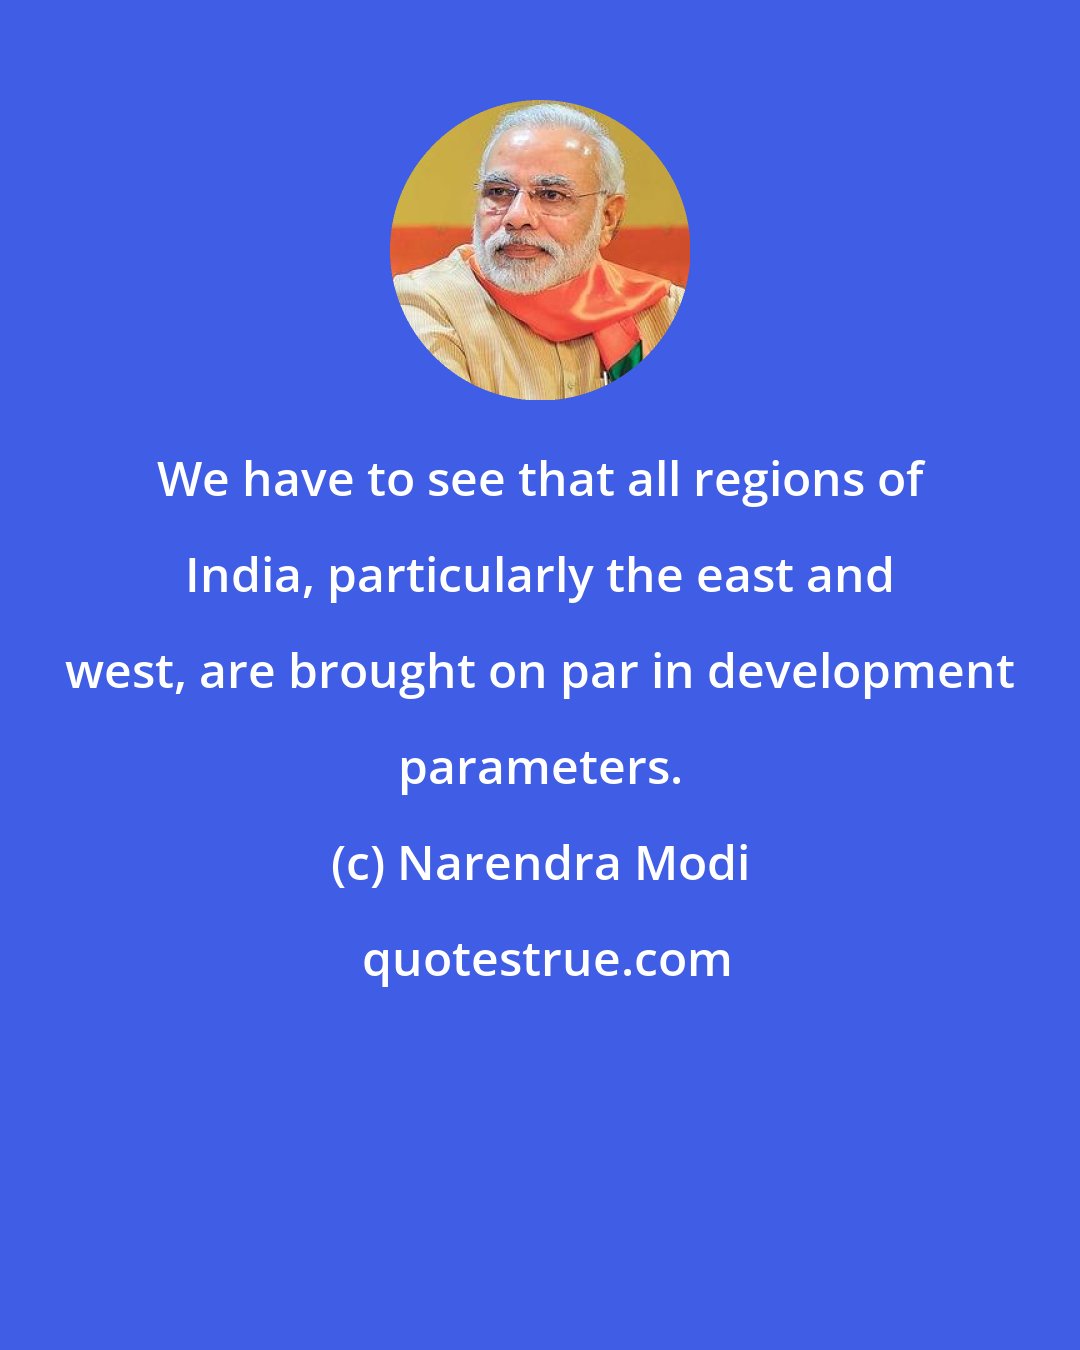 Narendra Modi: We have to see that all regions of India, particularly the east and west, are brought on par in development parameters.